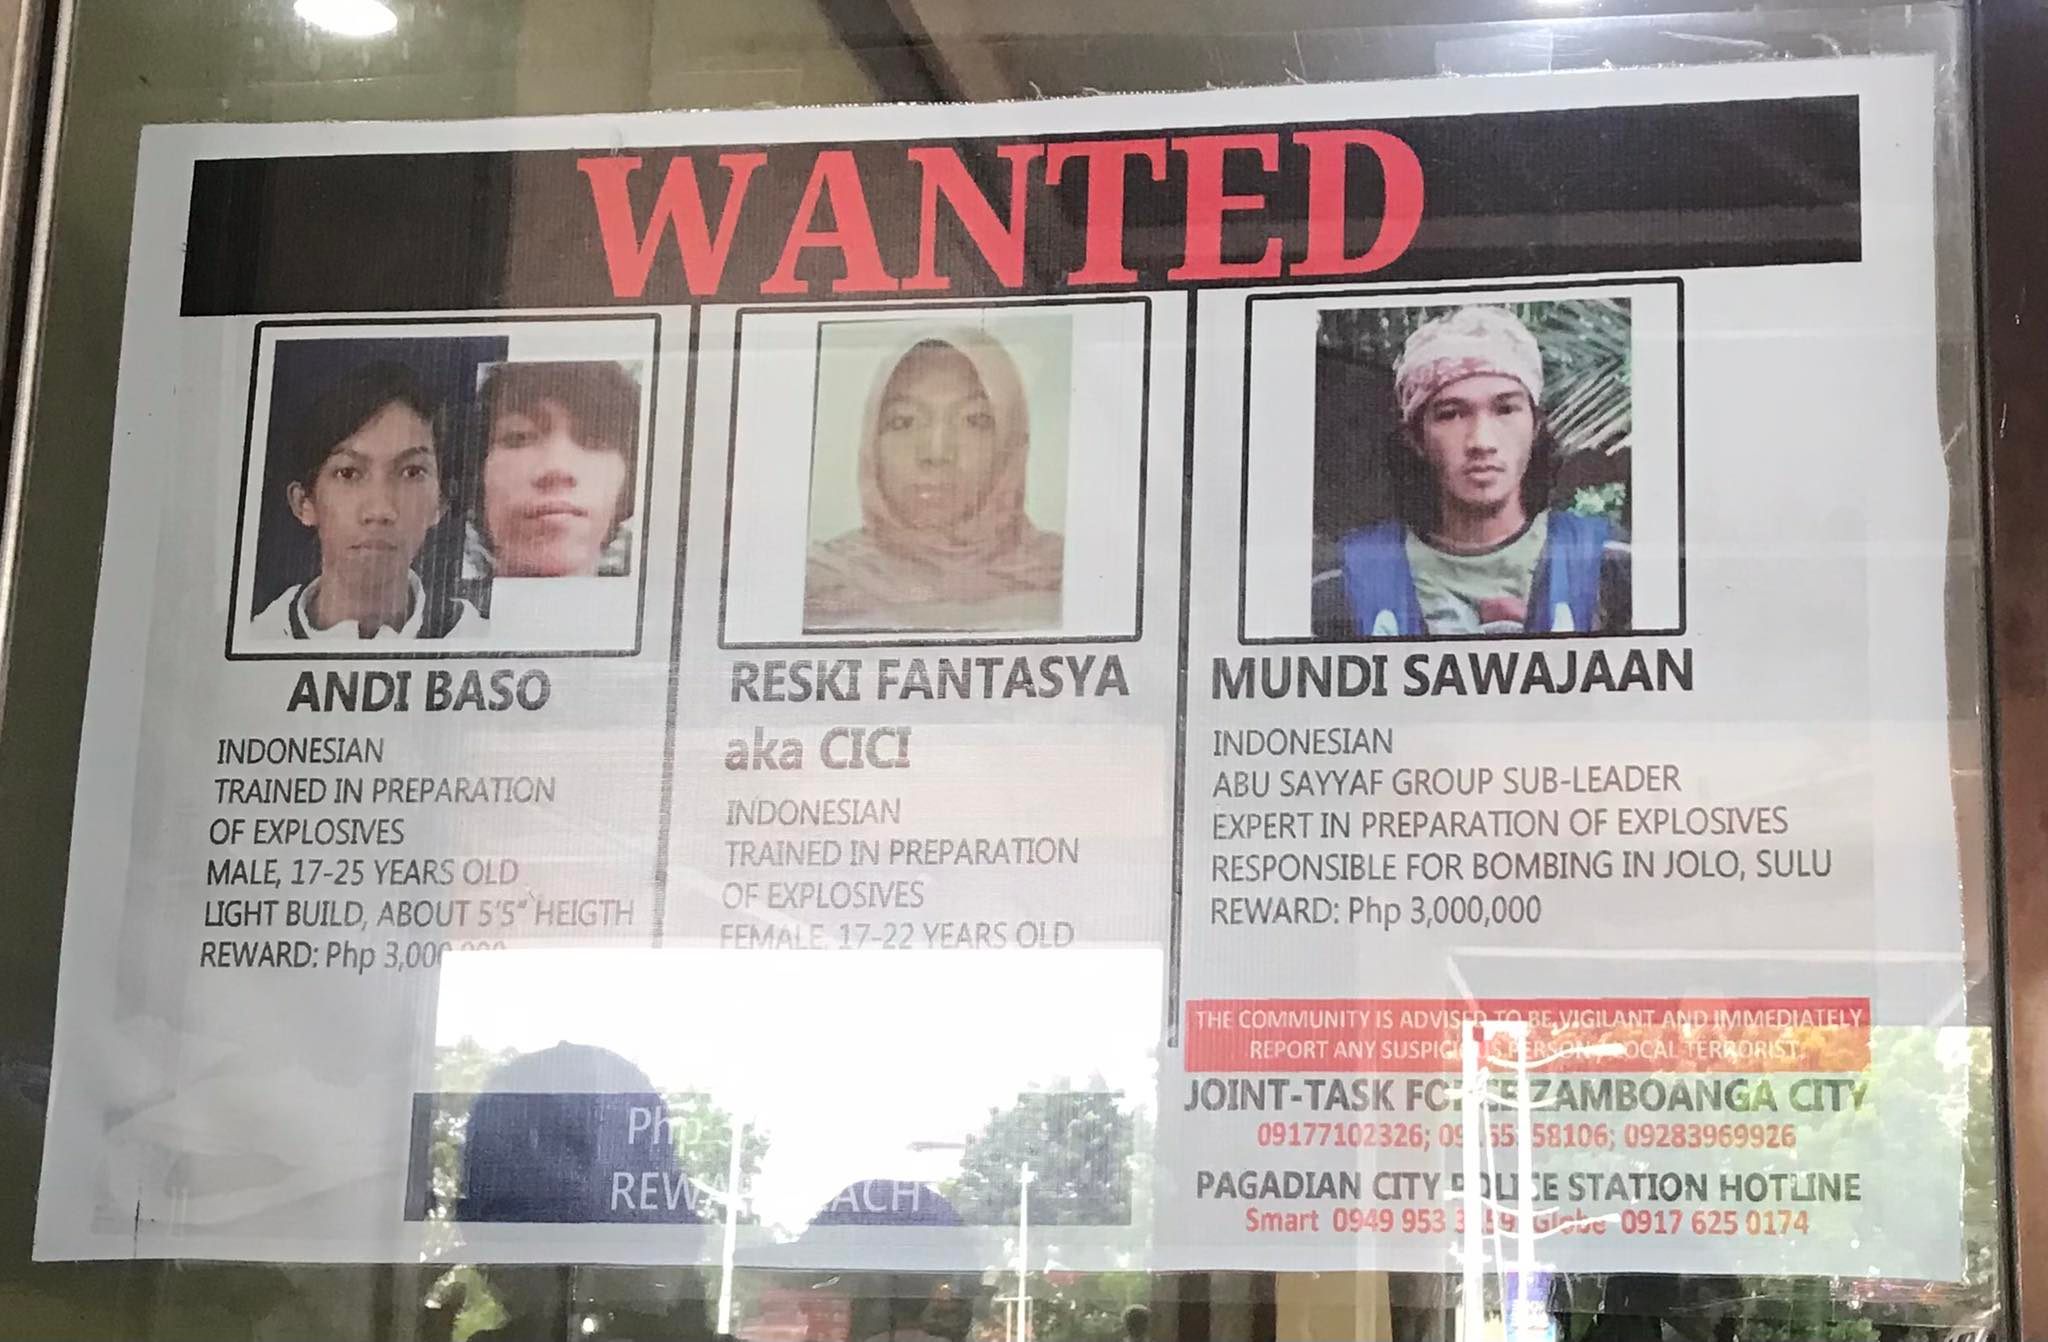 (Poster) Three Indonesian IED-Experts and Abu-Sayyaf Members are Wanted, Zamboanga City and Pagadian City, Philippines - 6 April 2023